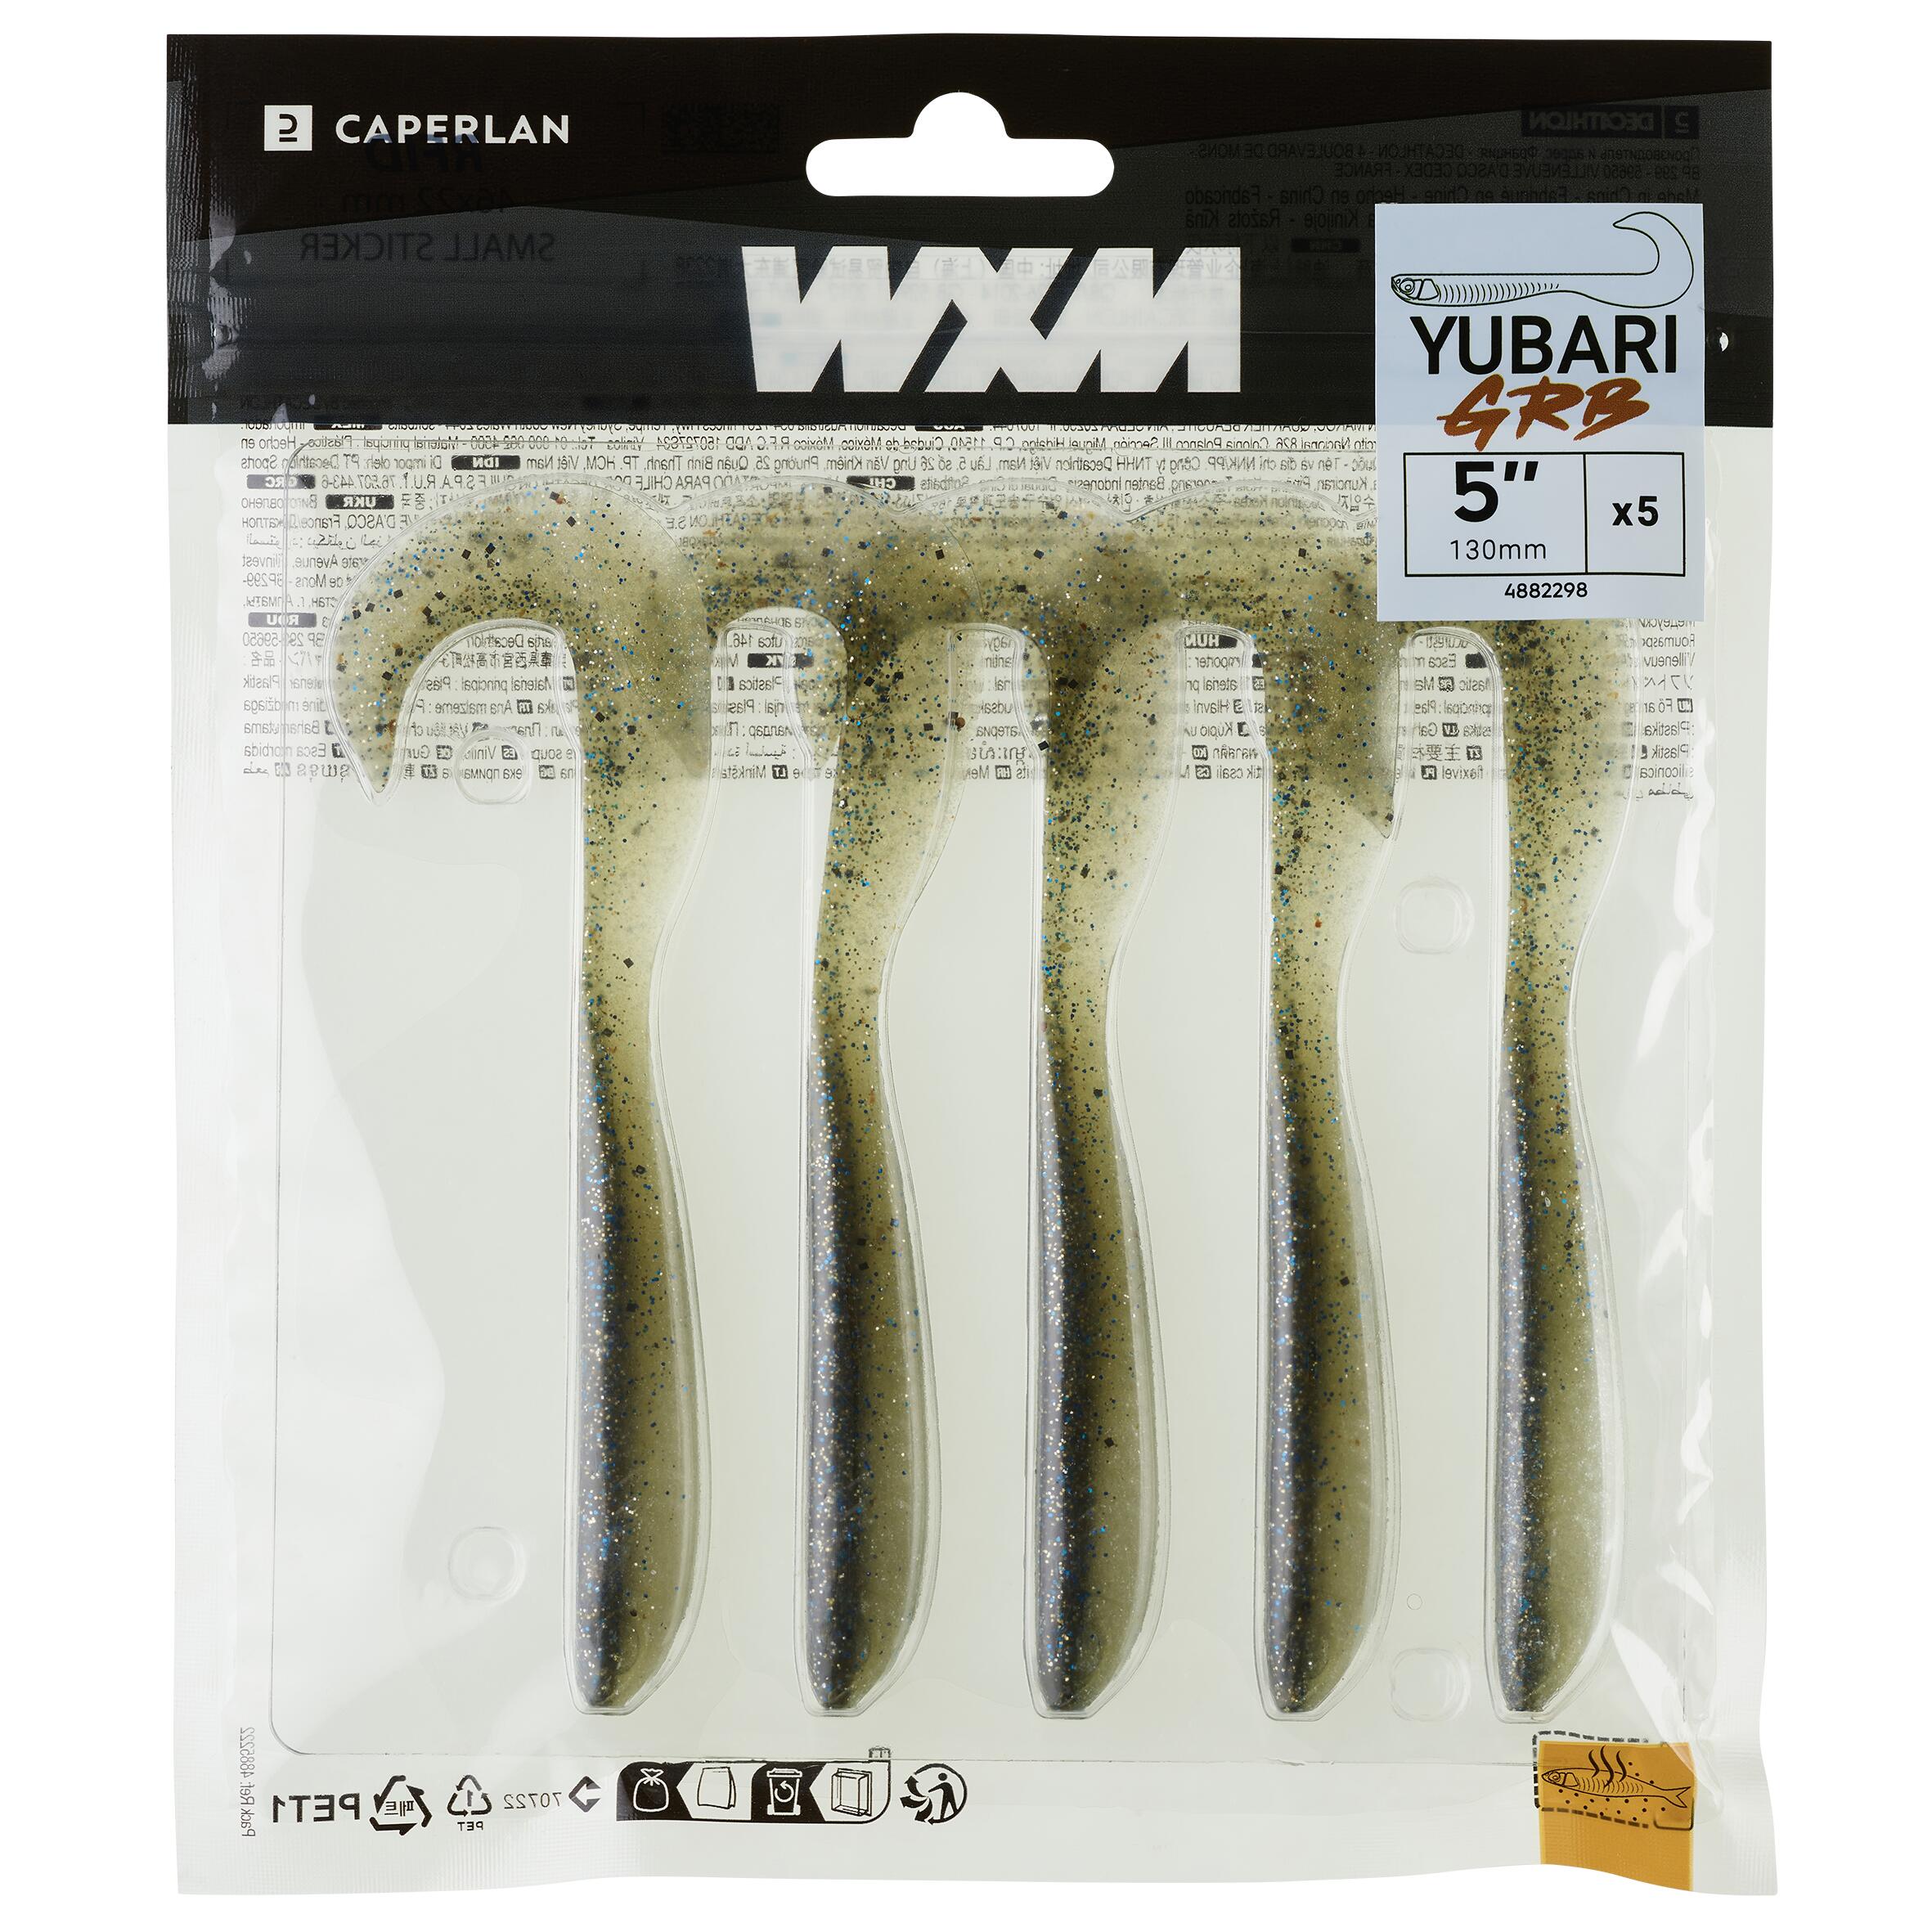 GRUB SHAPED SOFT LURE WITH ATTRACTANT WXM YUBARI GRB 90 CHARTREUSE 4/6